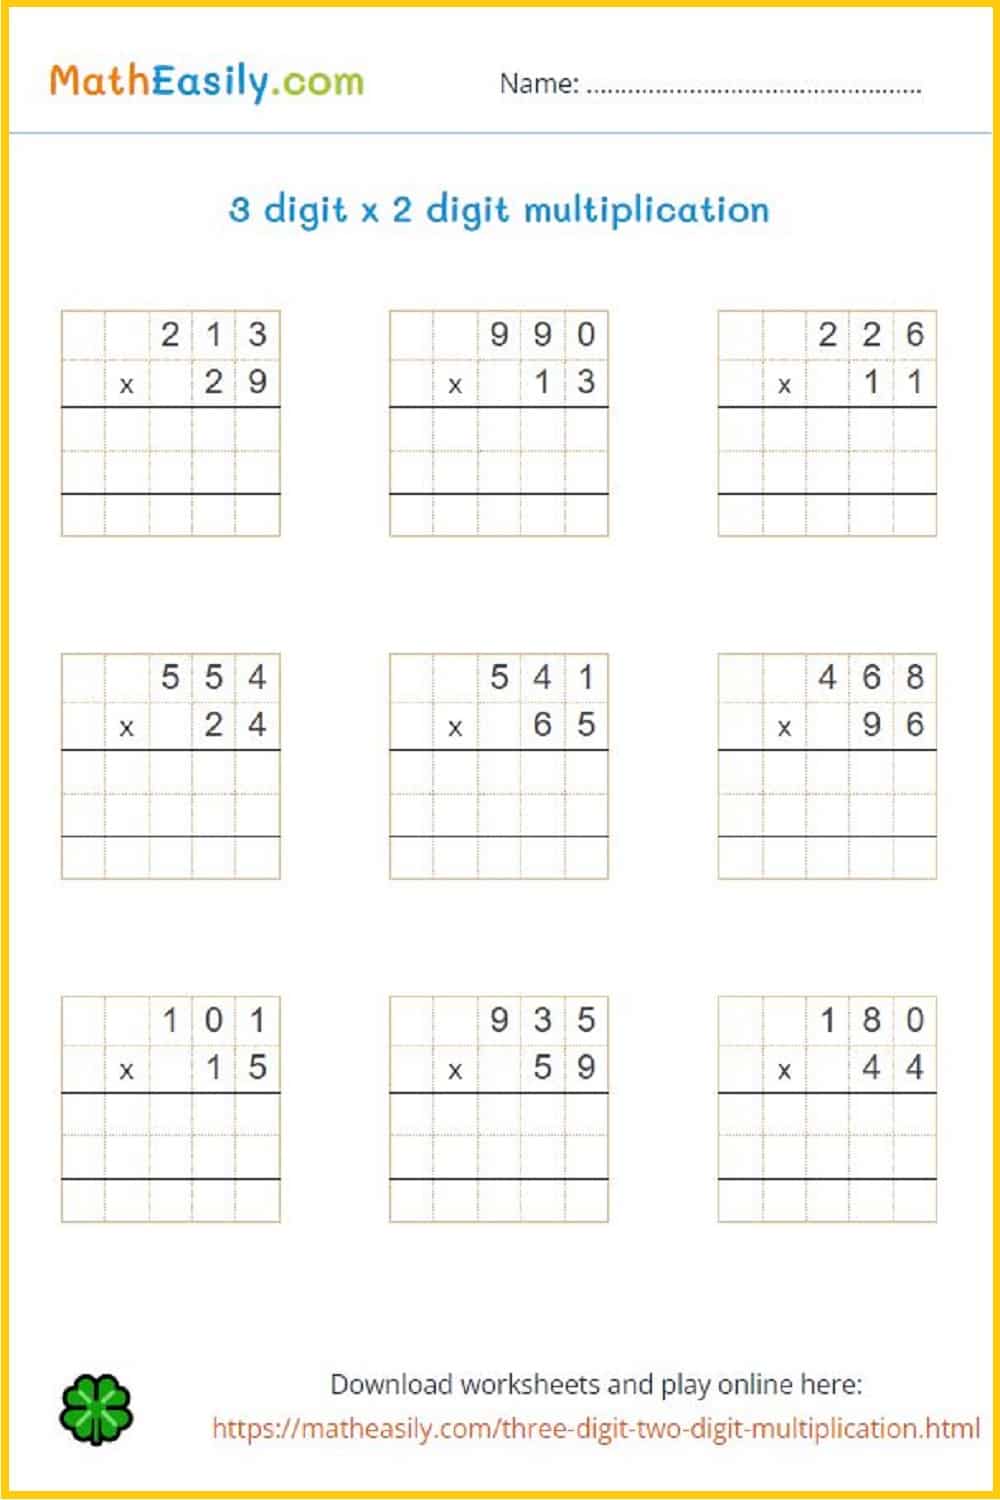 Free printable multi digit multiplication 
worksheets with answers